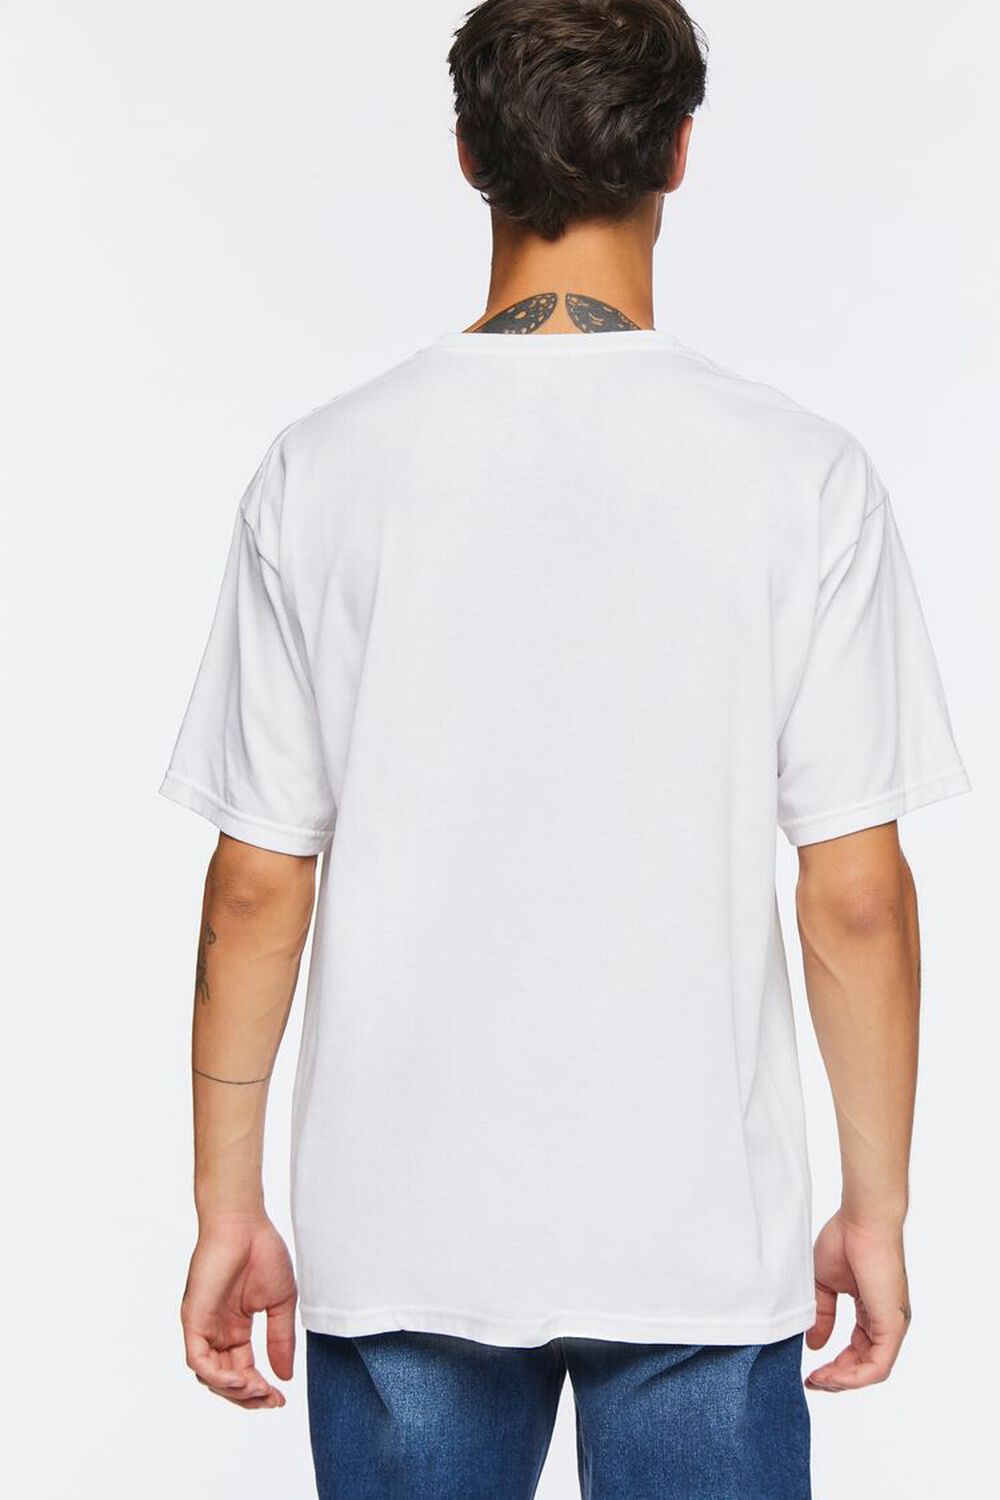 WHITE/MULTI Outkast Graphic Tee, image 3